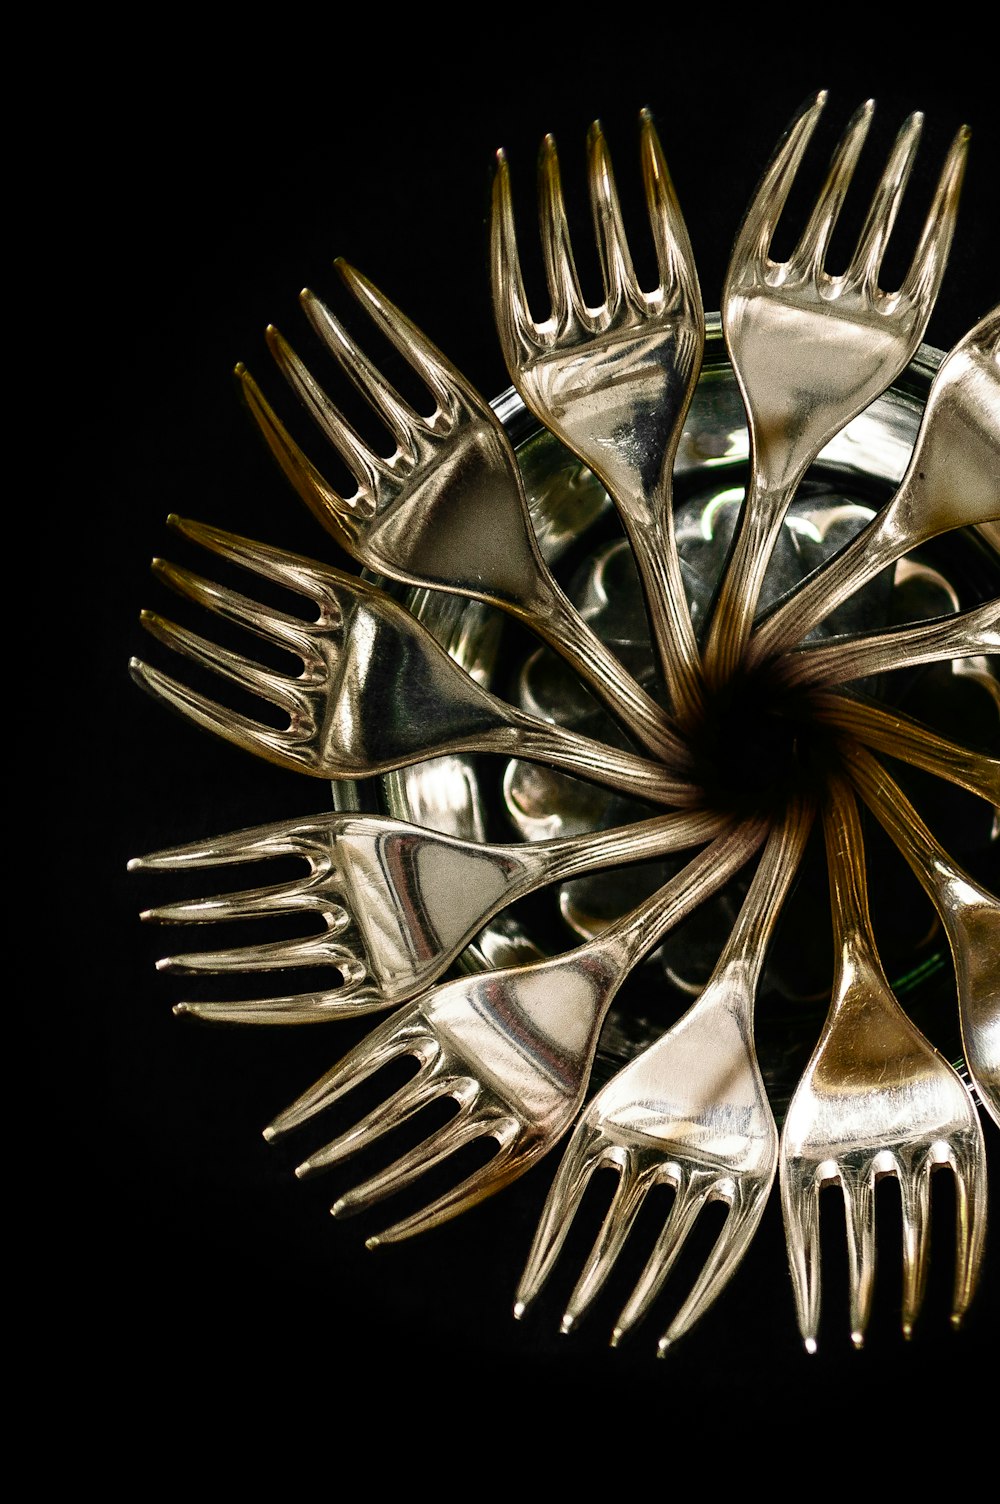 stainless steel fork lot in black background